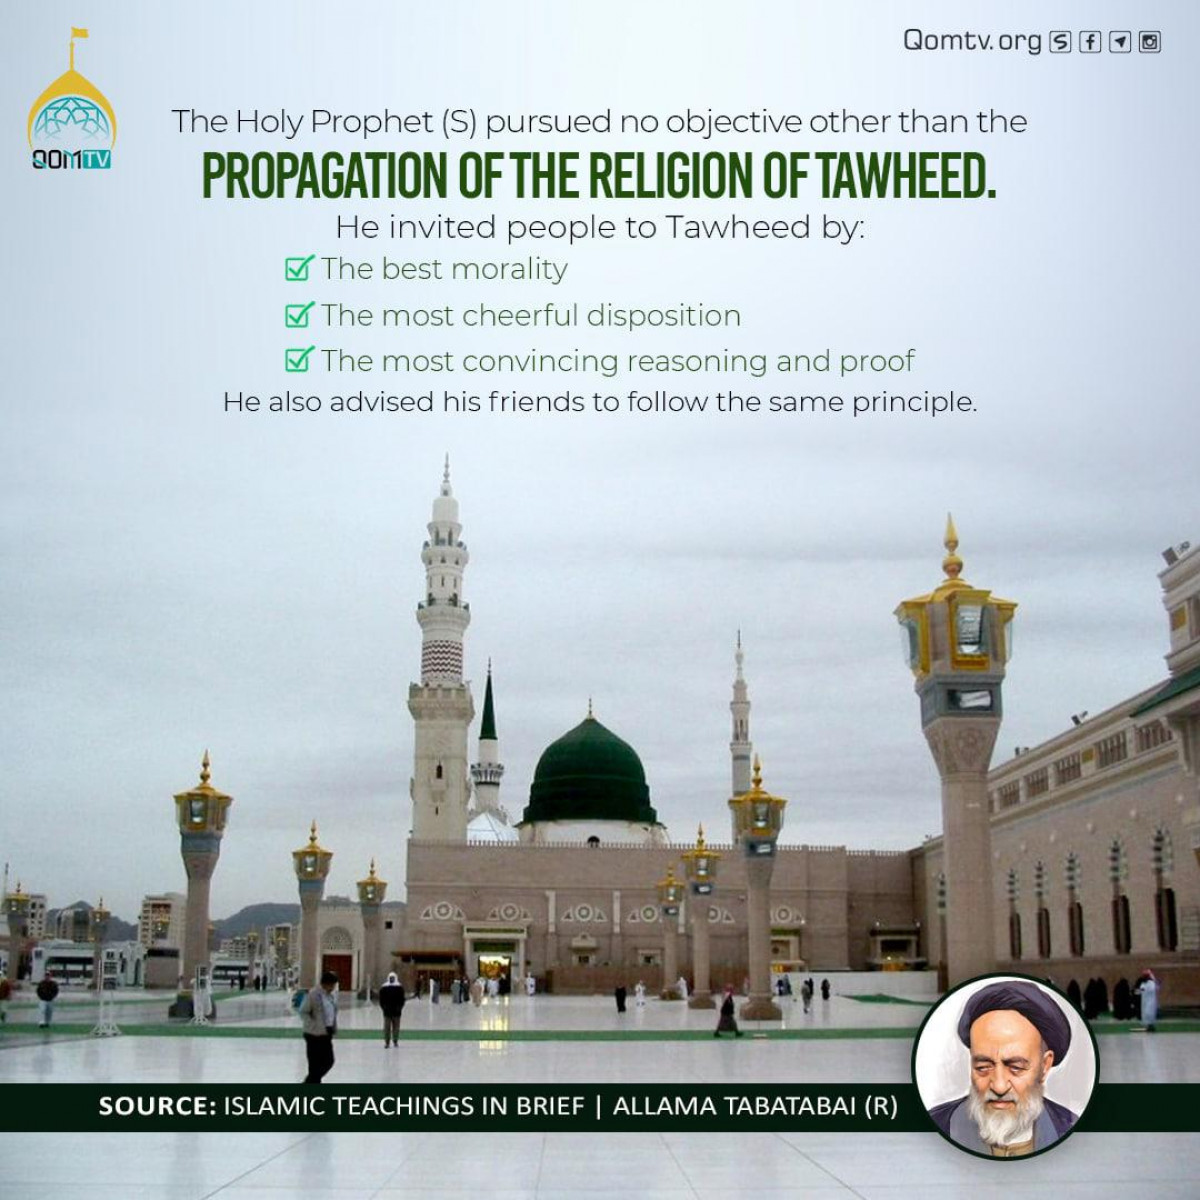 The Holy Prophet (S) pursued no objective other than the propagation of the religion of Tawheed